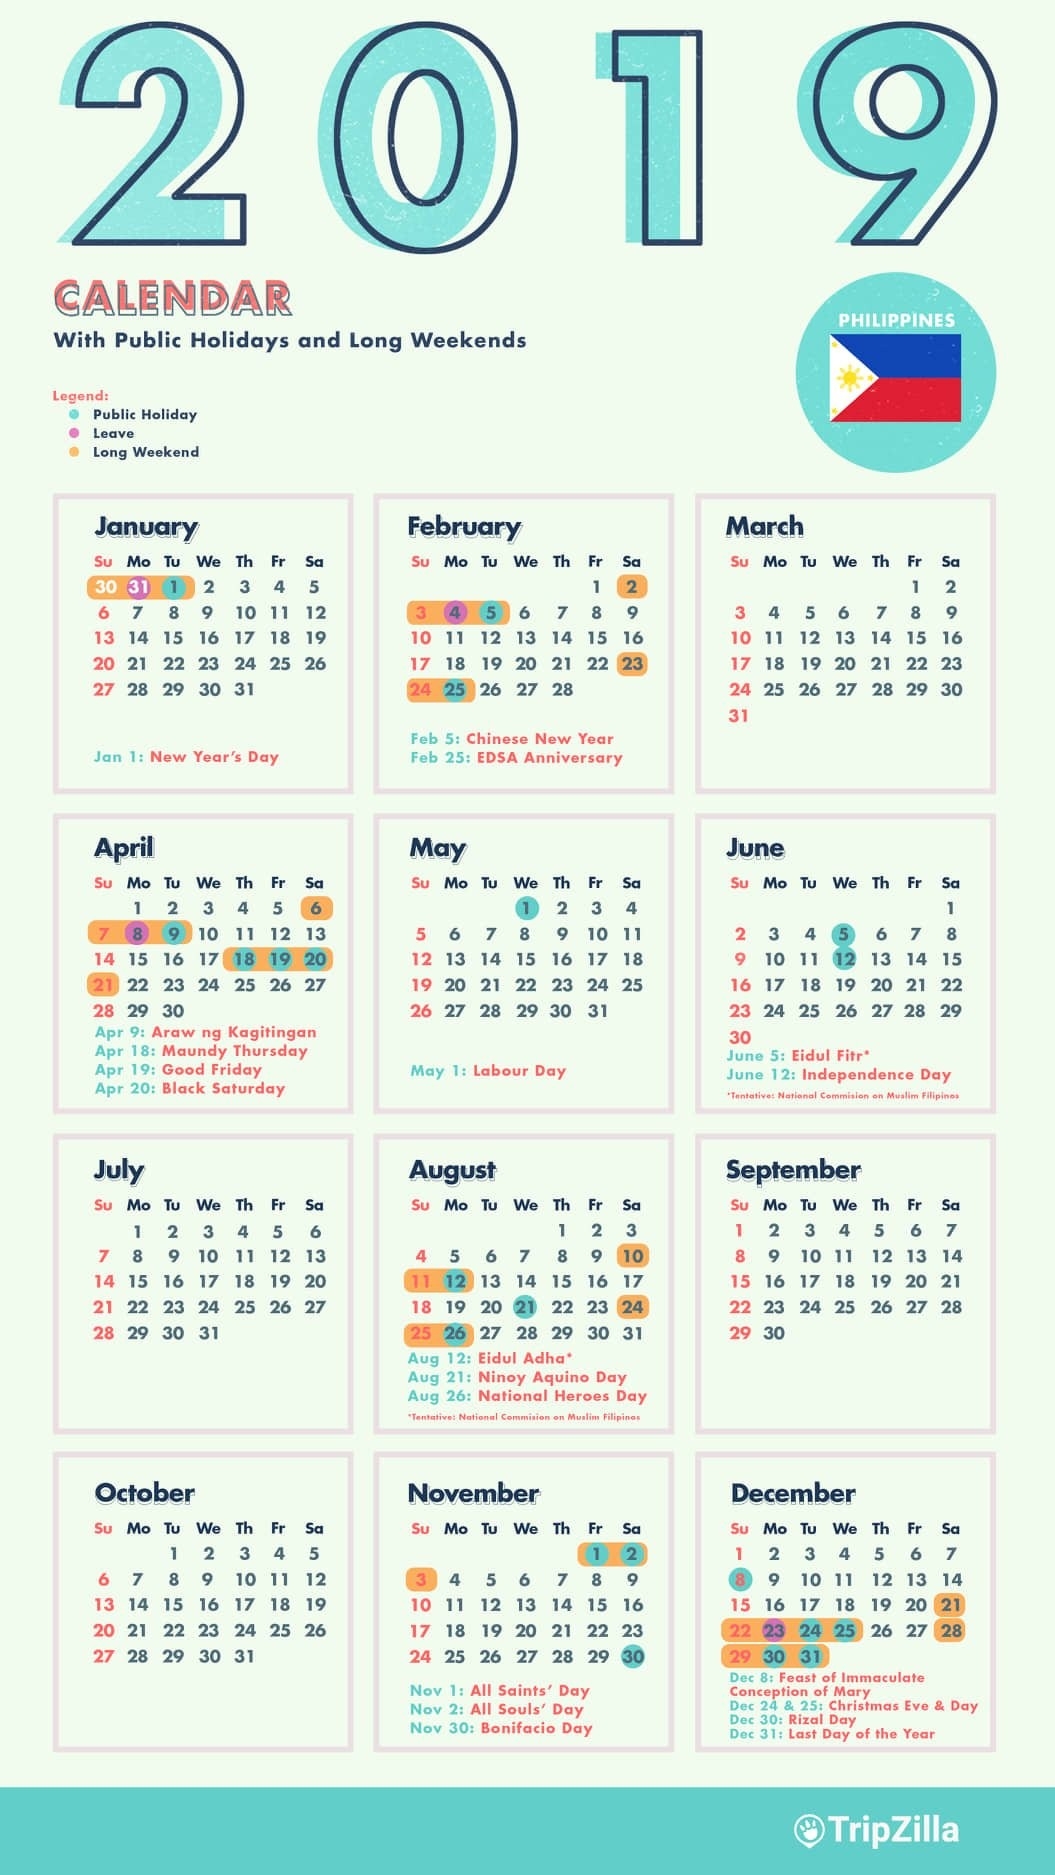 10 Long Weekends In The Philippines In 2019 With Calendar-Holidays In The Philippines 2020